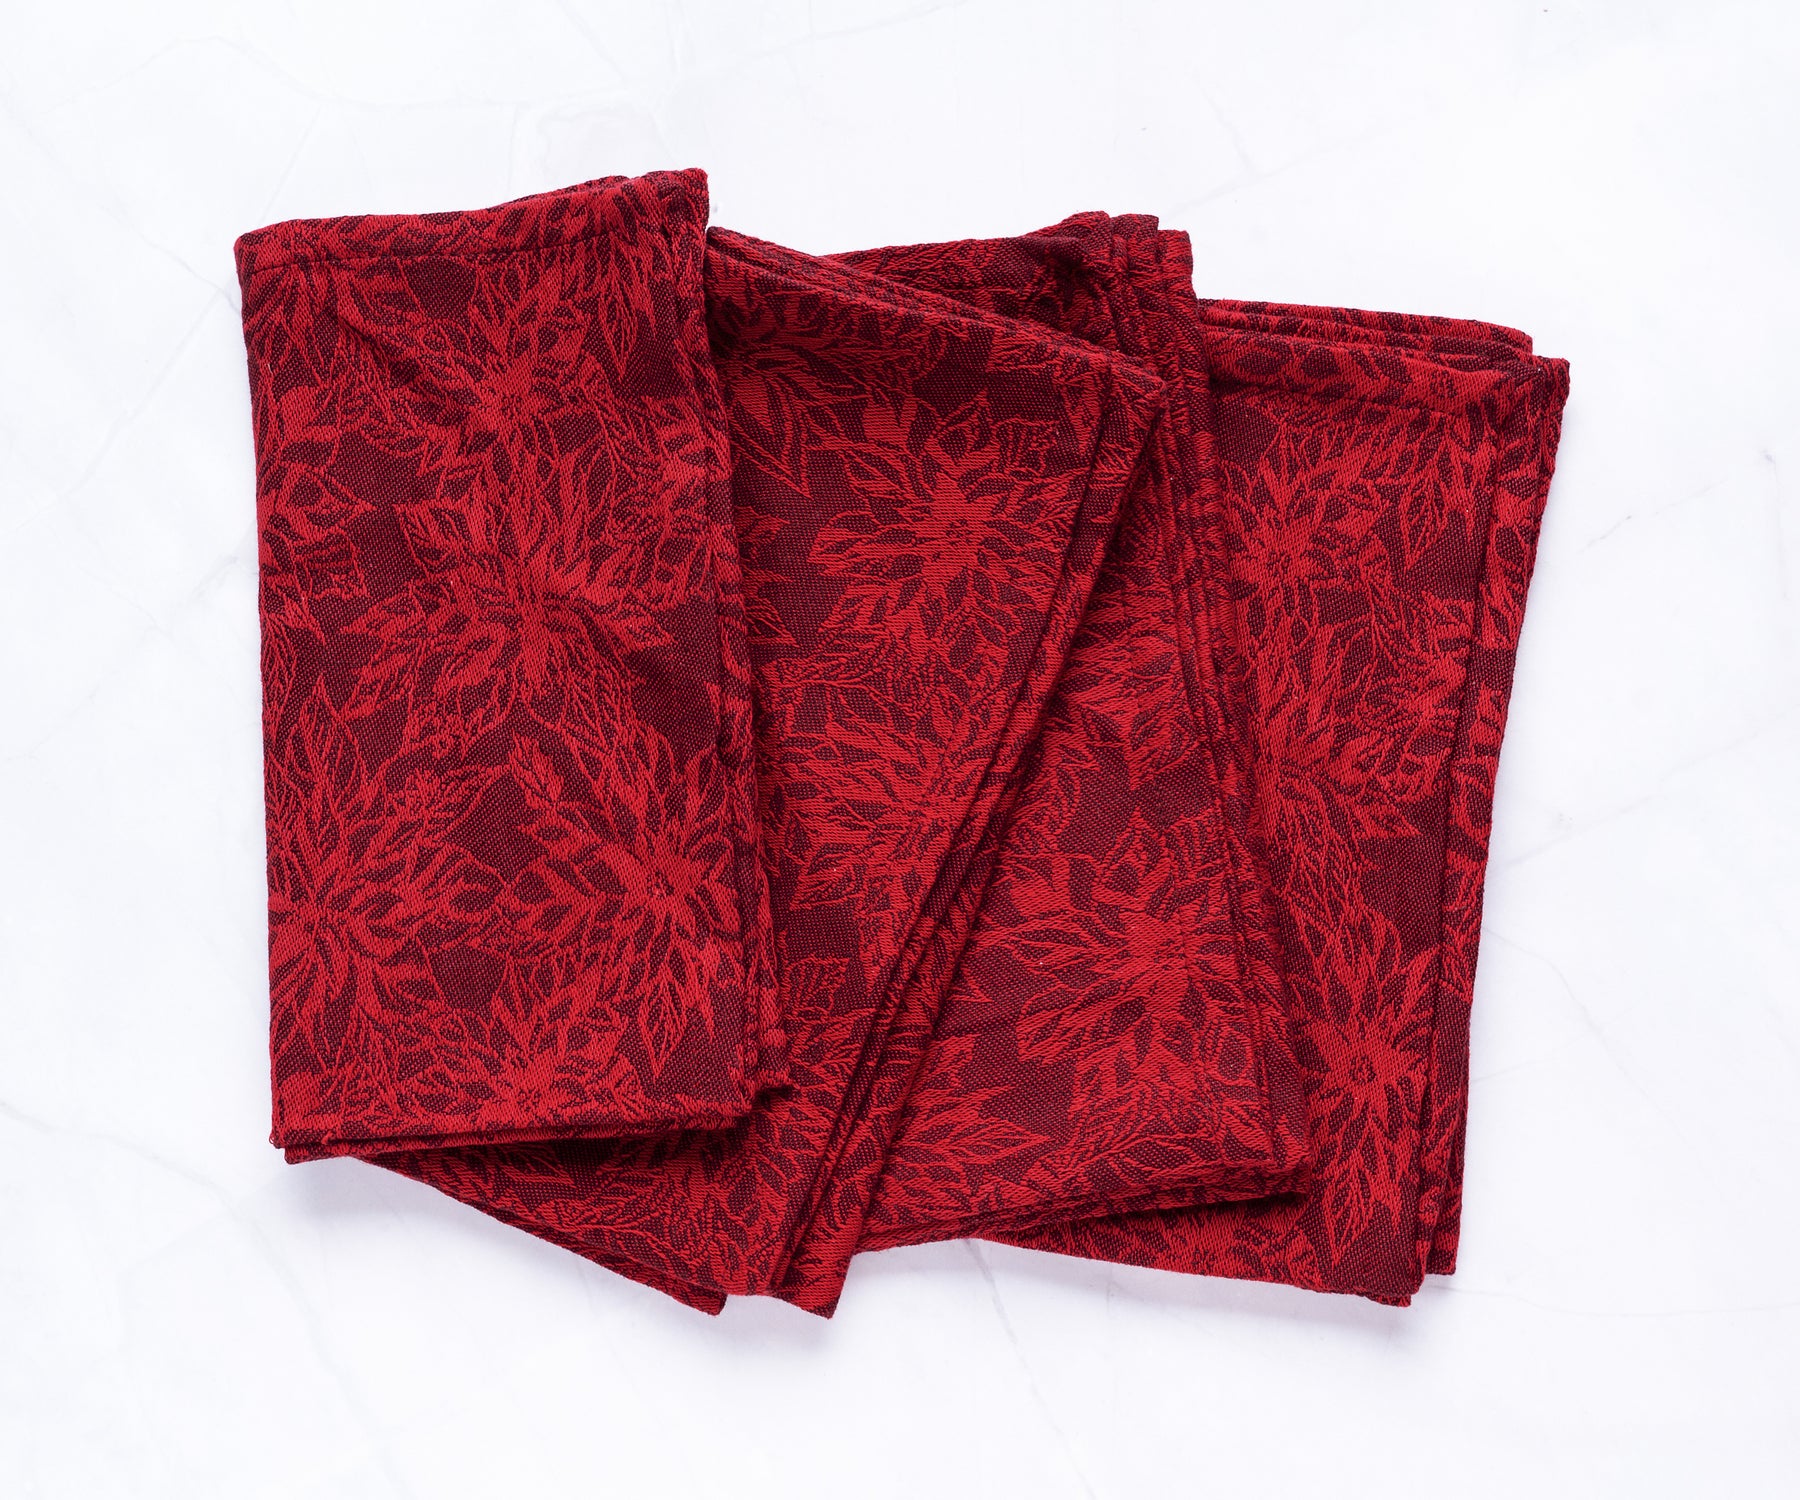 Red Cloth Napkins Material: Red jacquard napkins are typically made from high-quality fabric, often a blend of cotton. 